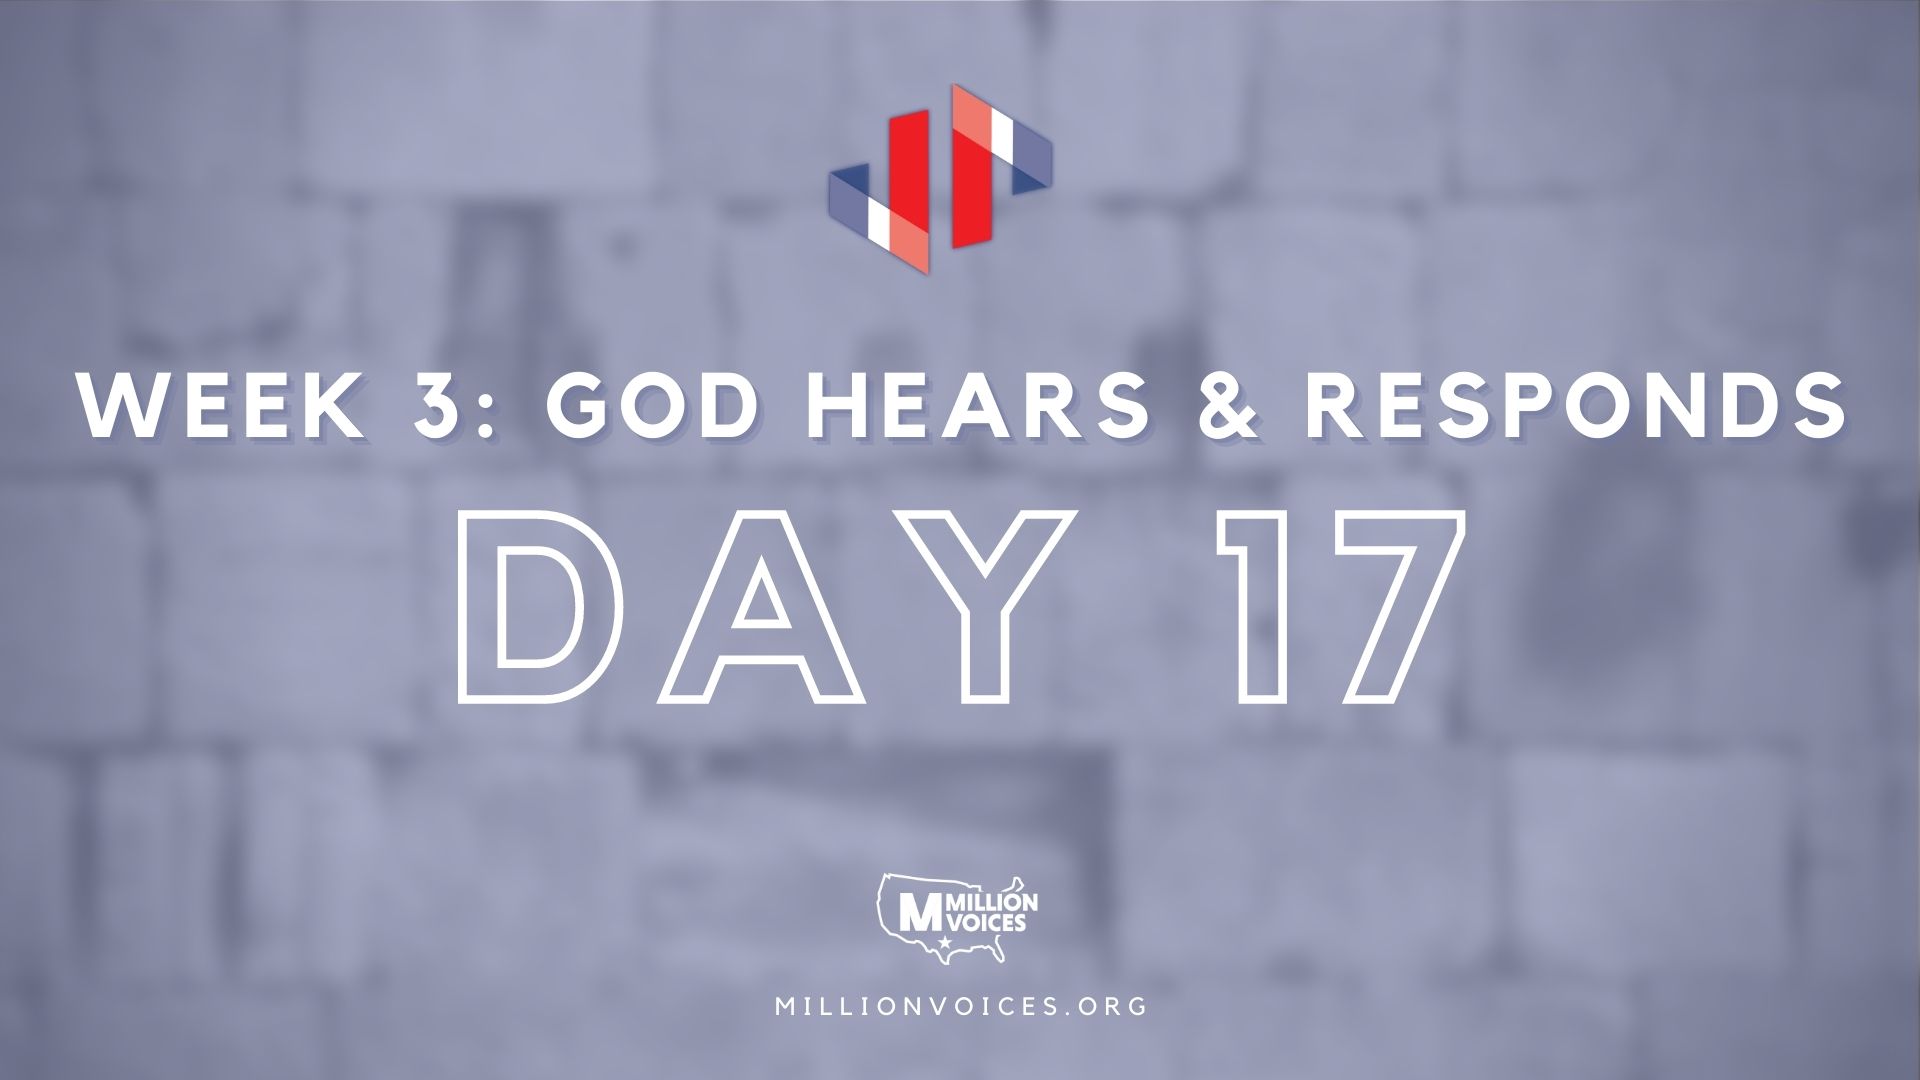 Million Voices - Pause to Pray Images - DAY 17